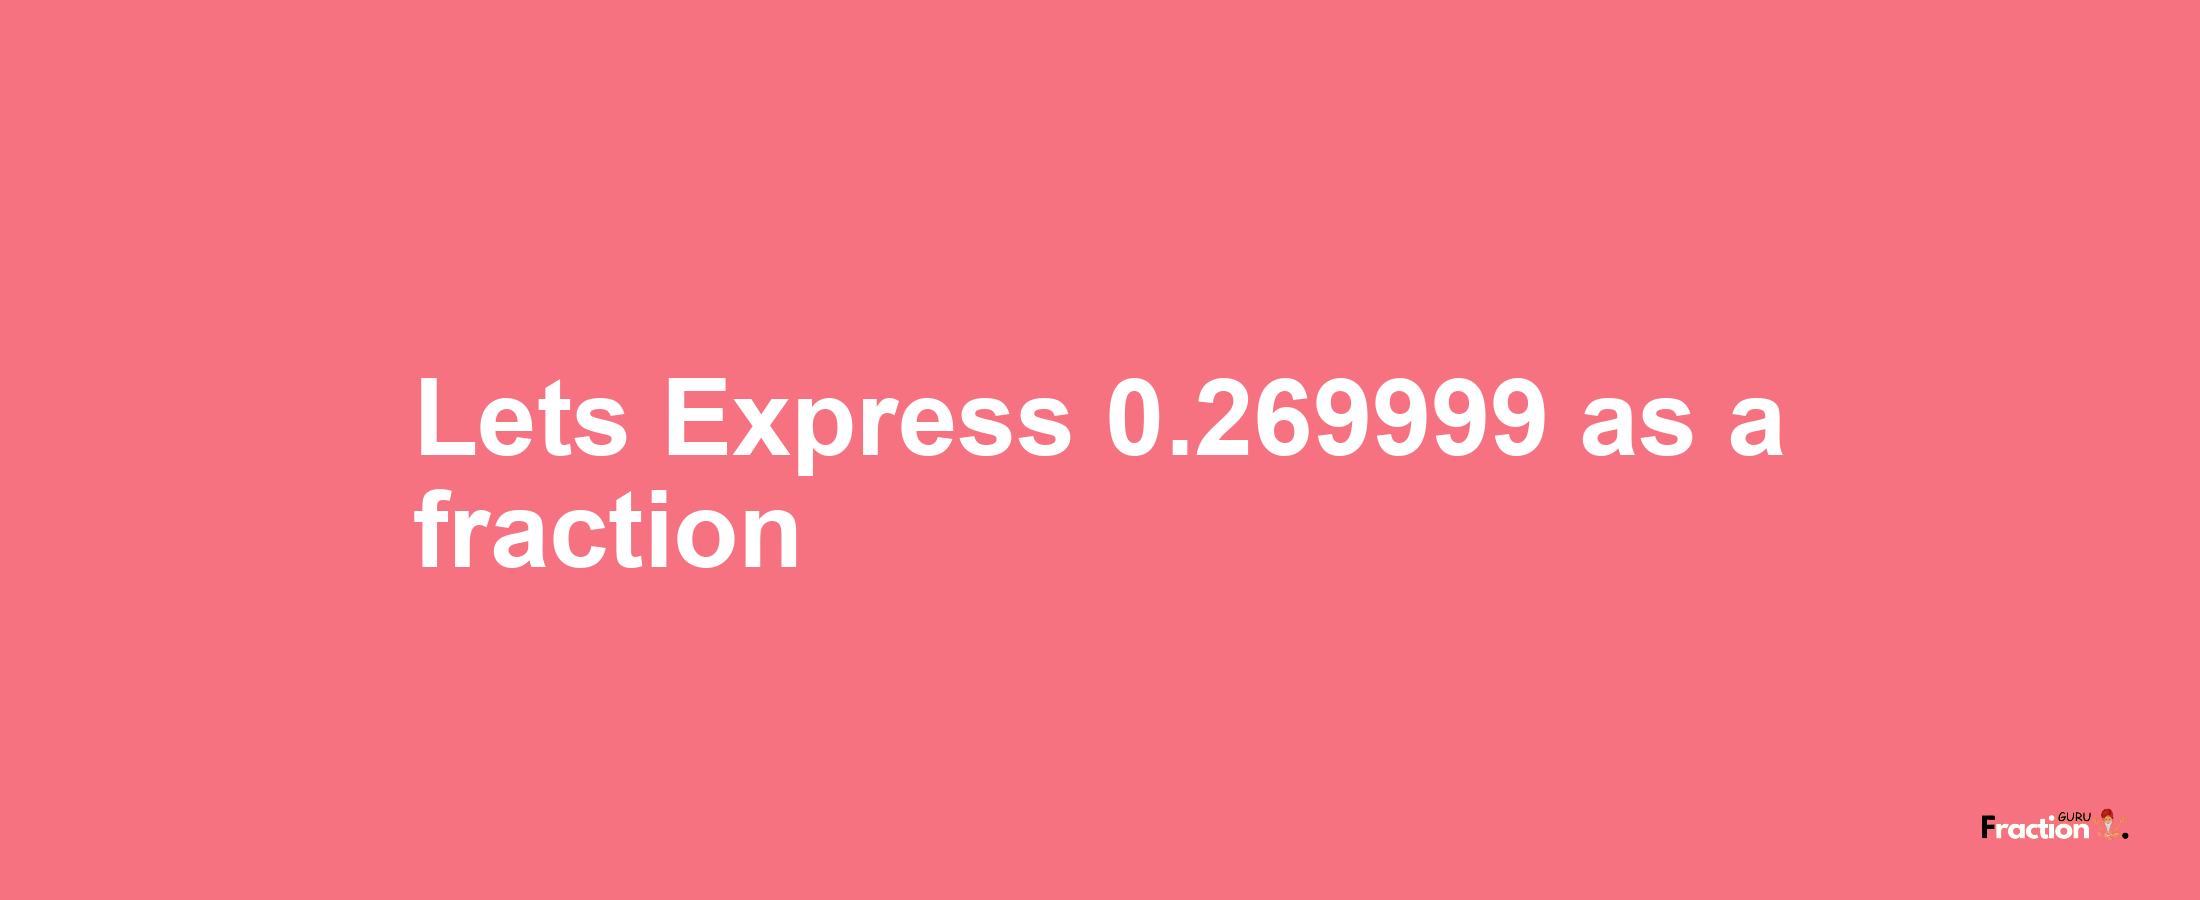 Lets Express 0.269999 as afraction